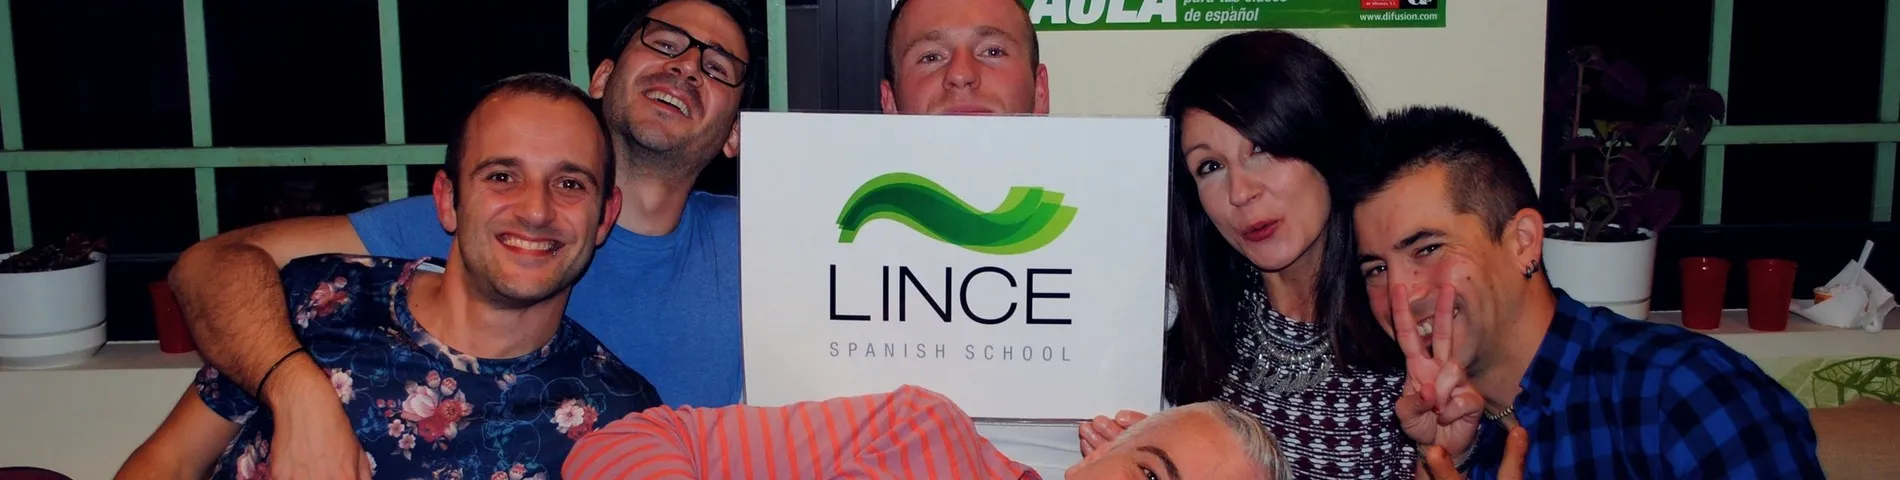 Lince Spanish School picture 1